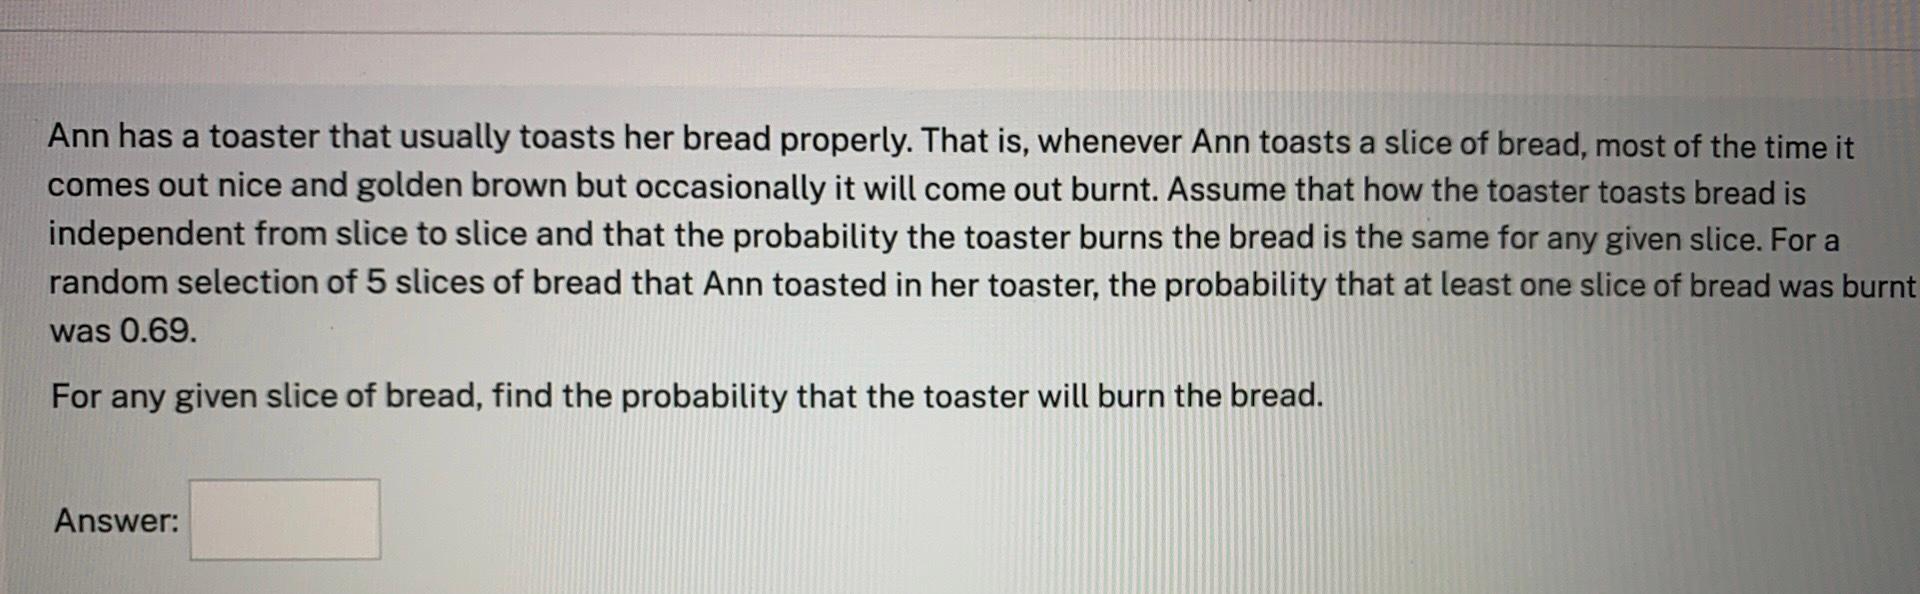 Ann Has A Toaster That Usually Toasts Her Bread Properly That Is Whenever Ann Toasts A Slice Of Bread Most Of The Tim 1